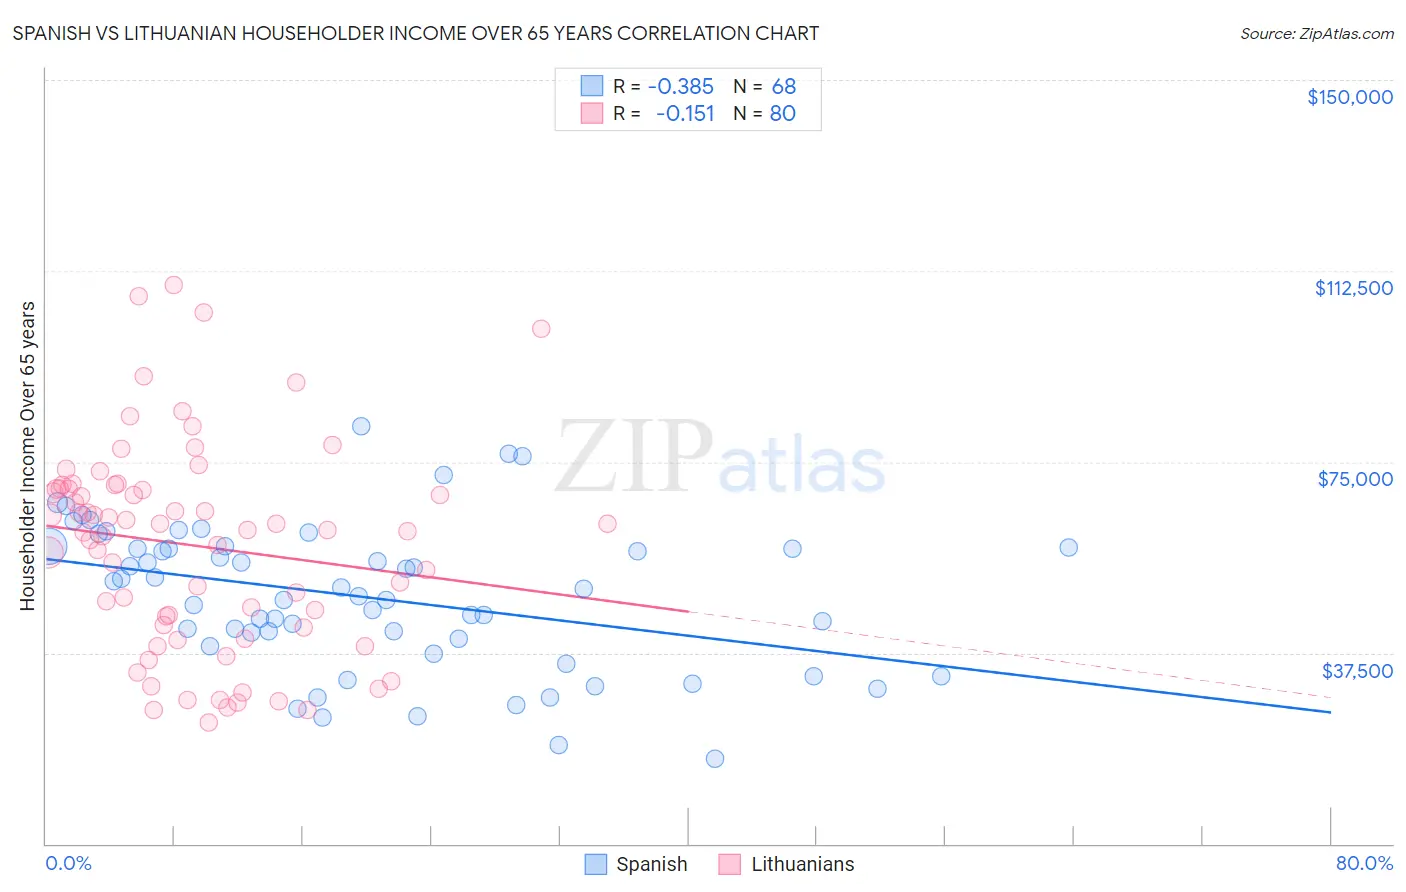 Spanish vs Lithuanian Householder Income Over 65 years